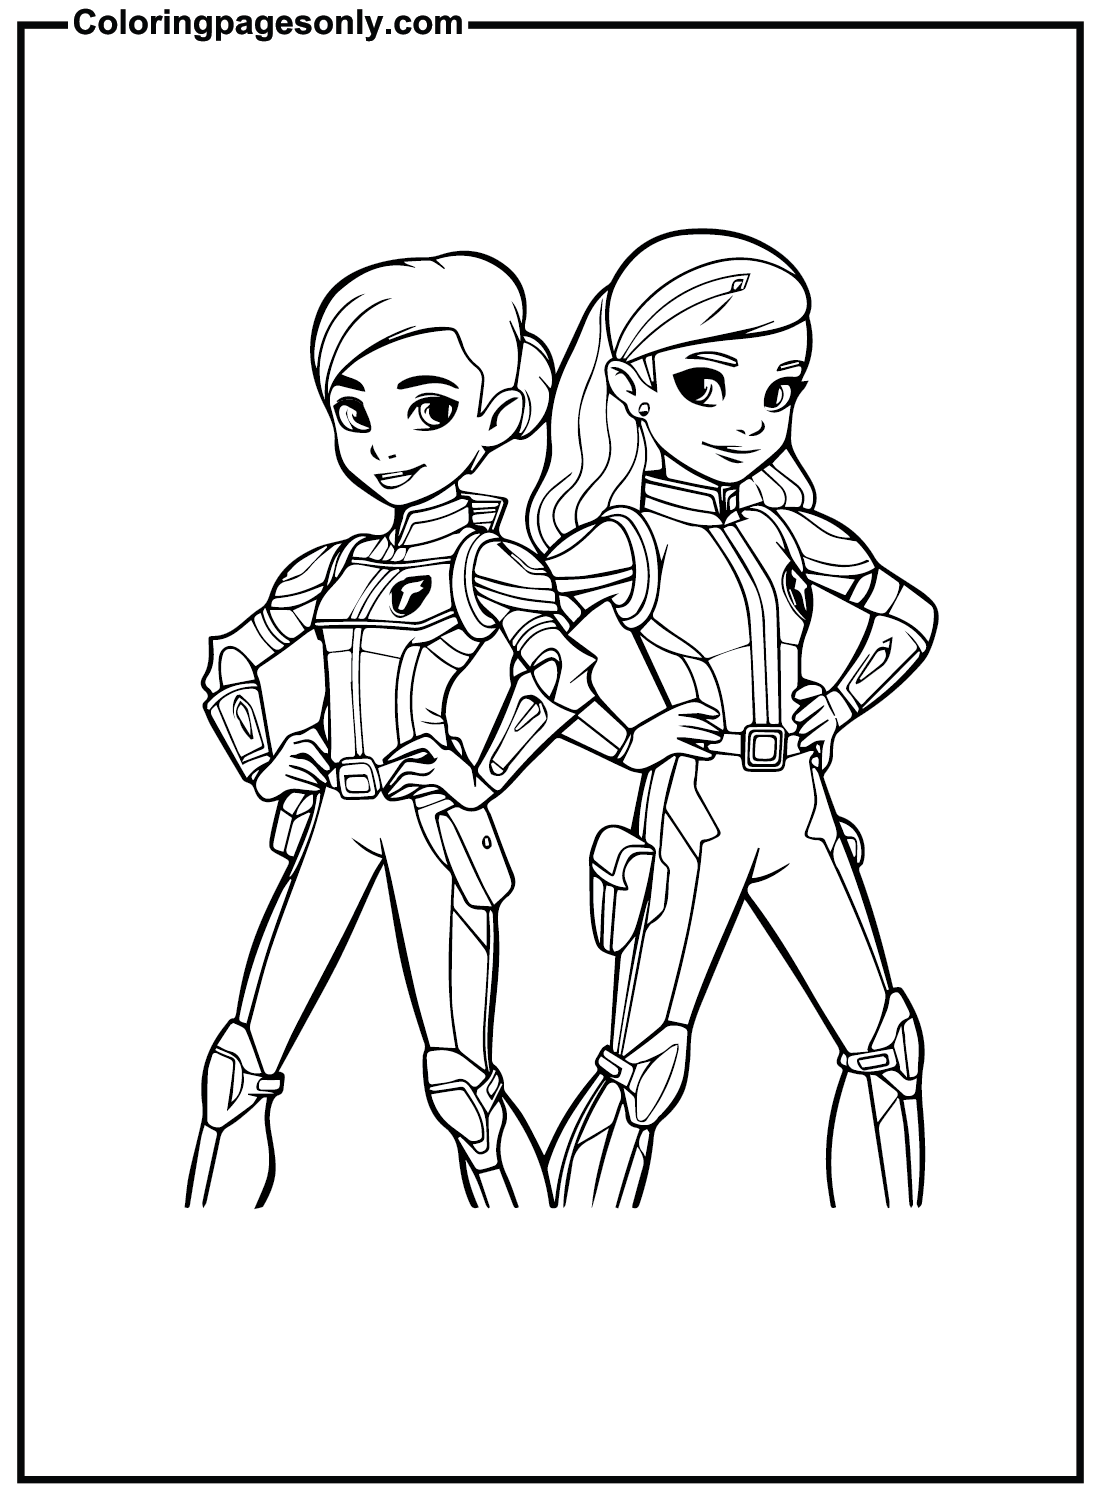 Rainbow Rangers Free Coloring Pages